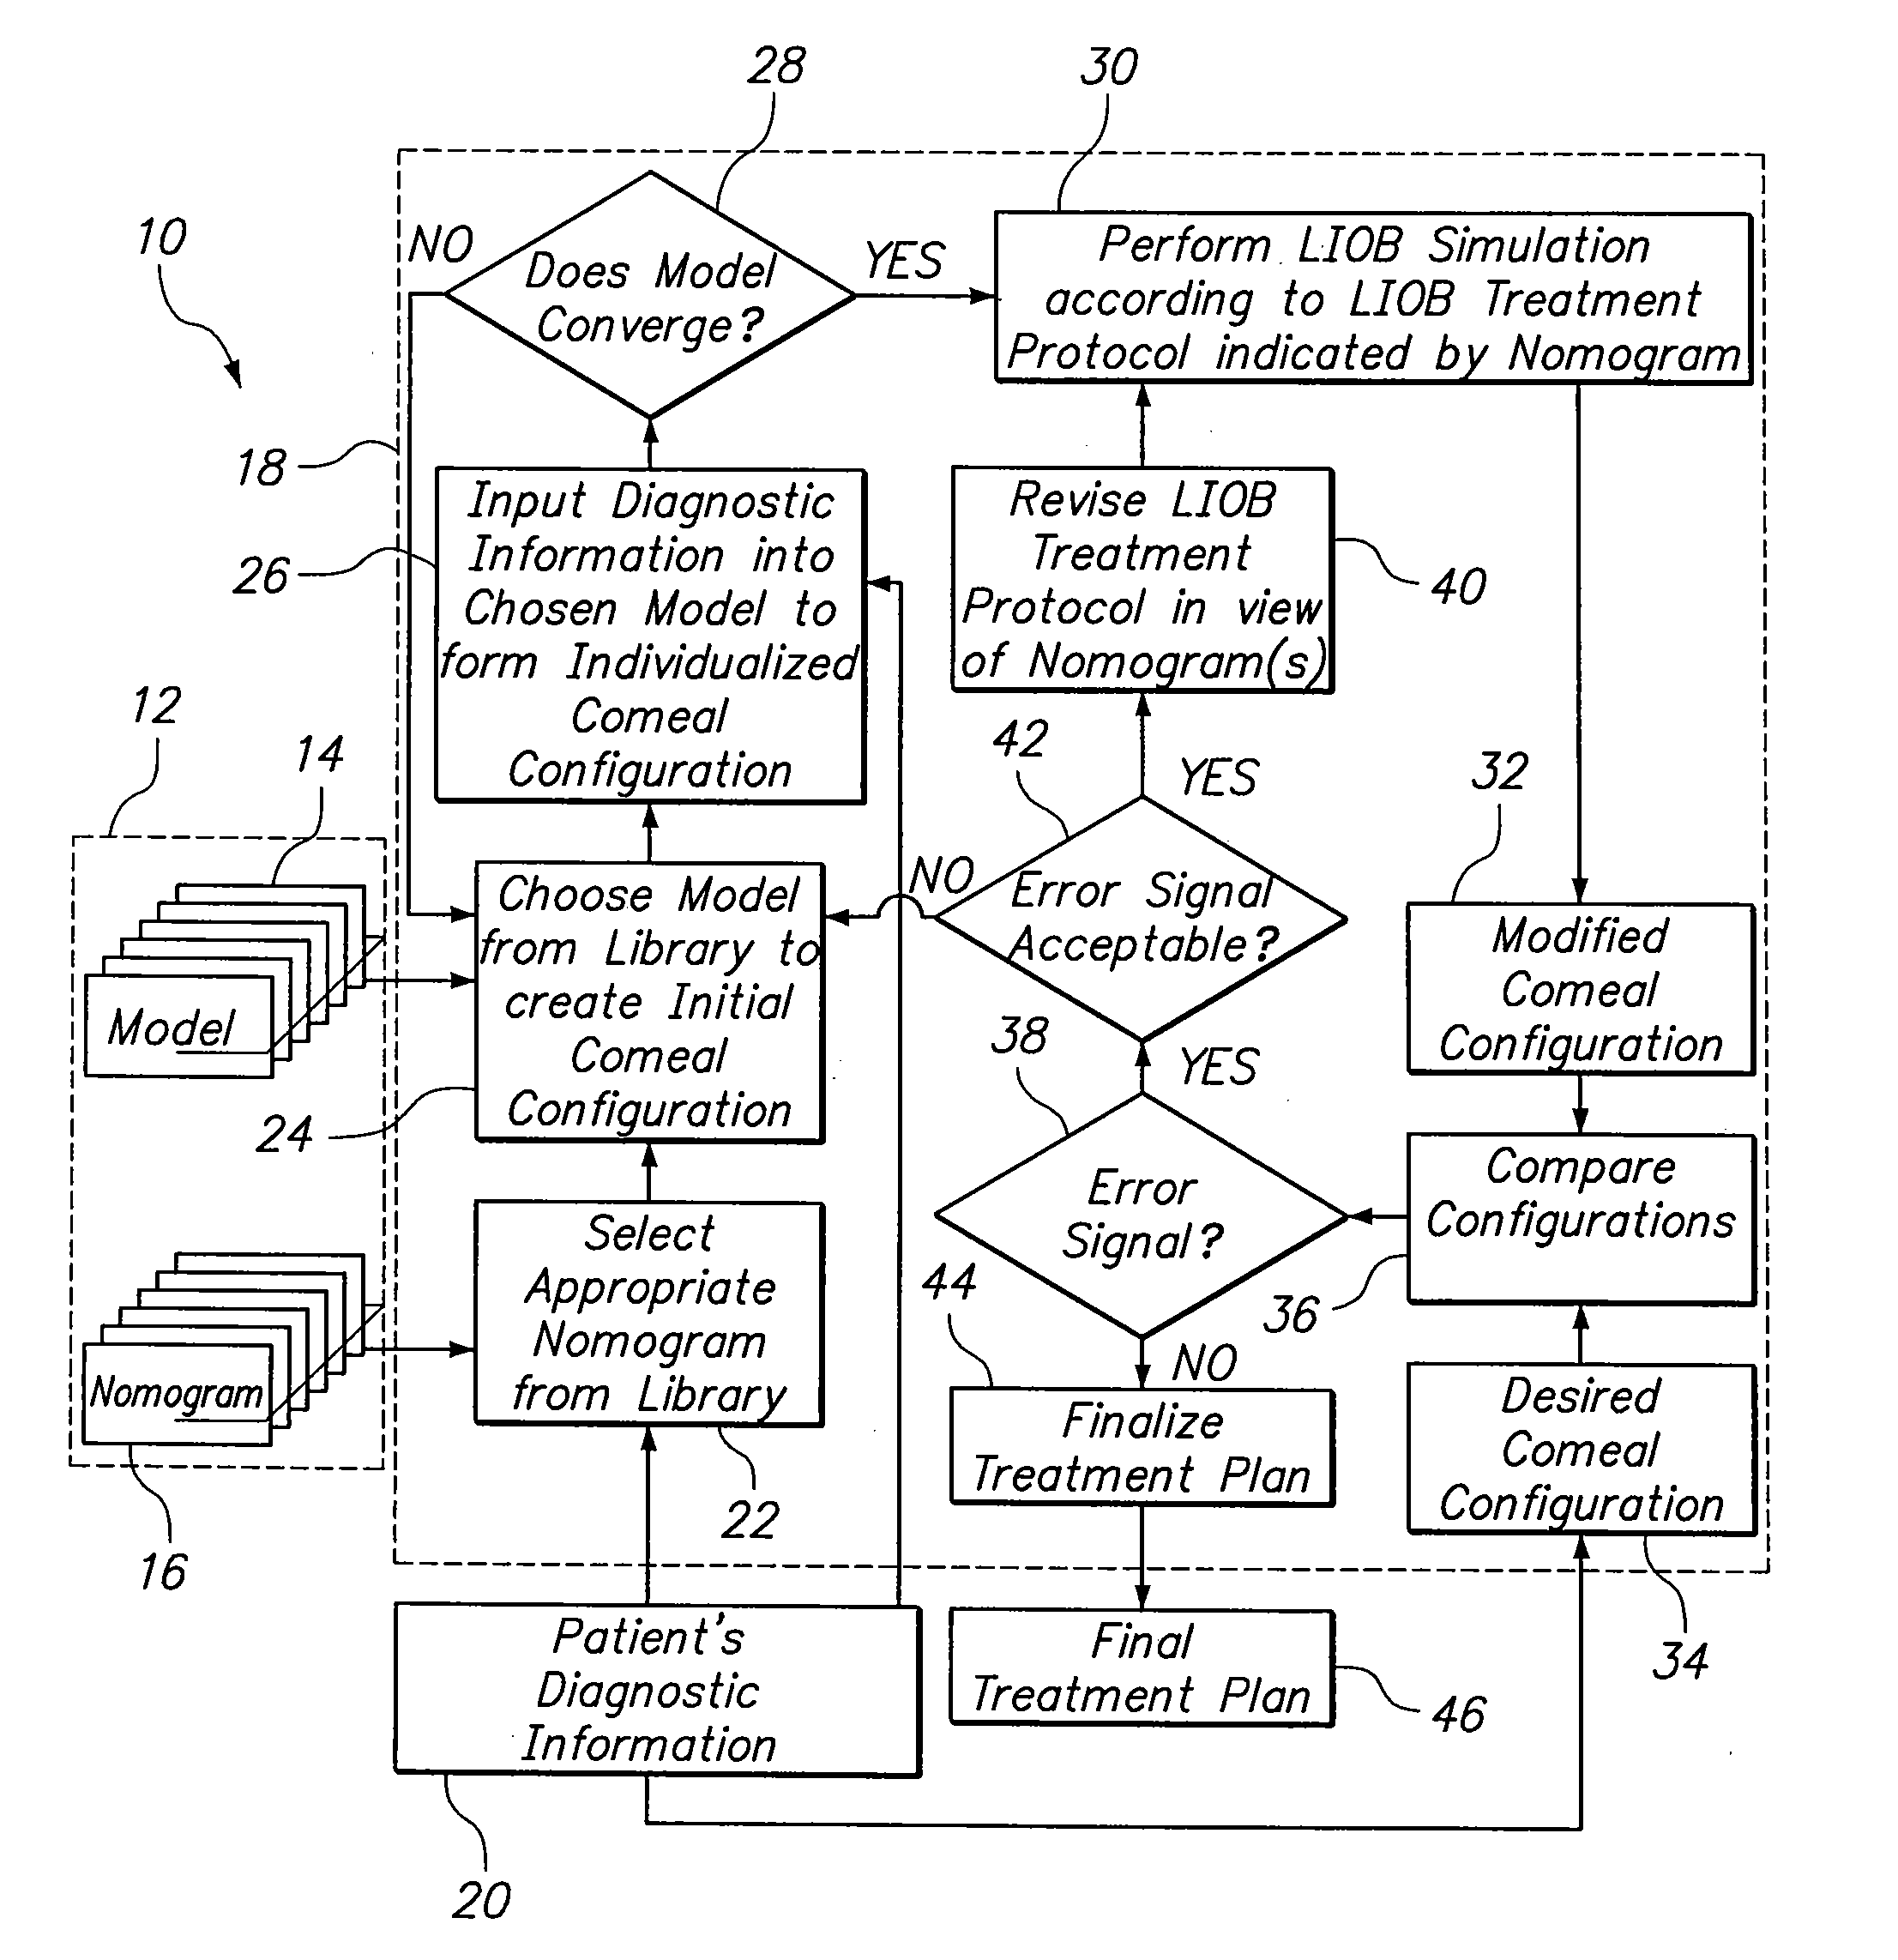 System and method for simulating an liob protocol to establish a treatment plan for a patient